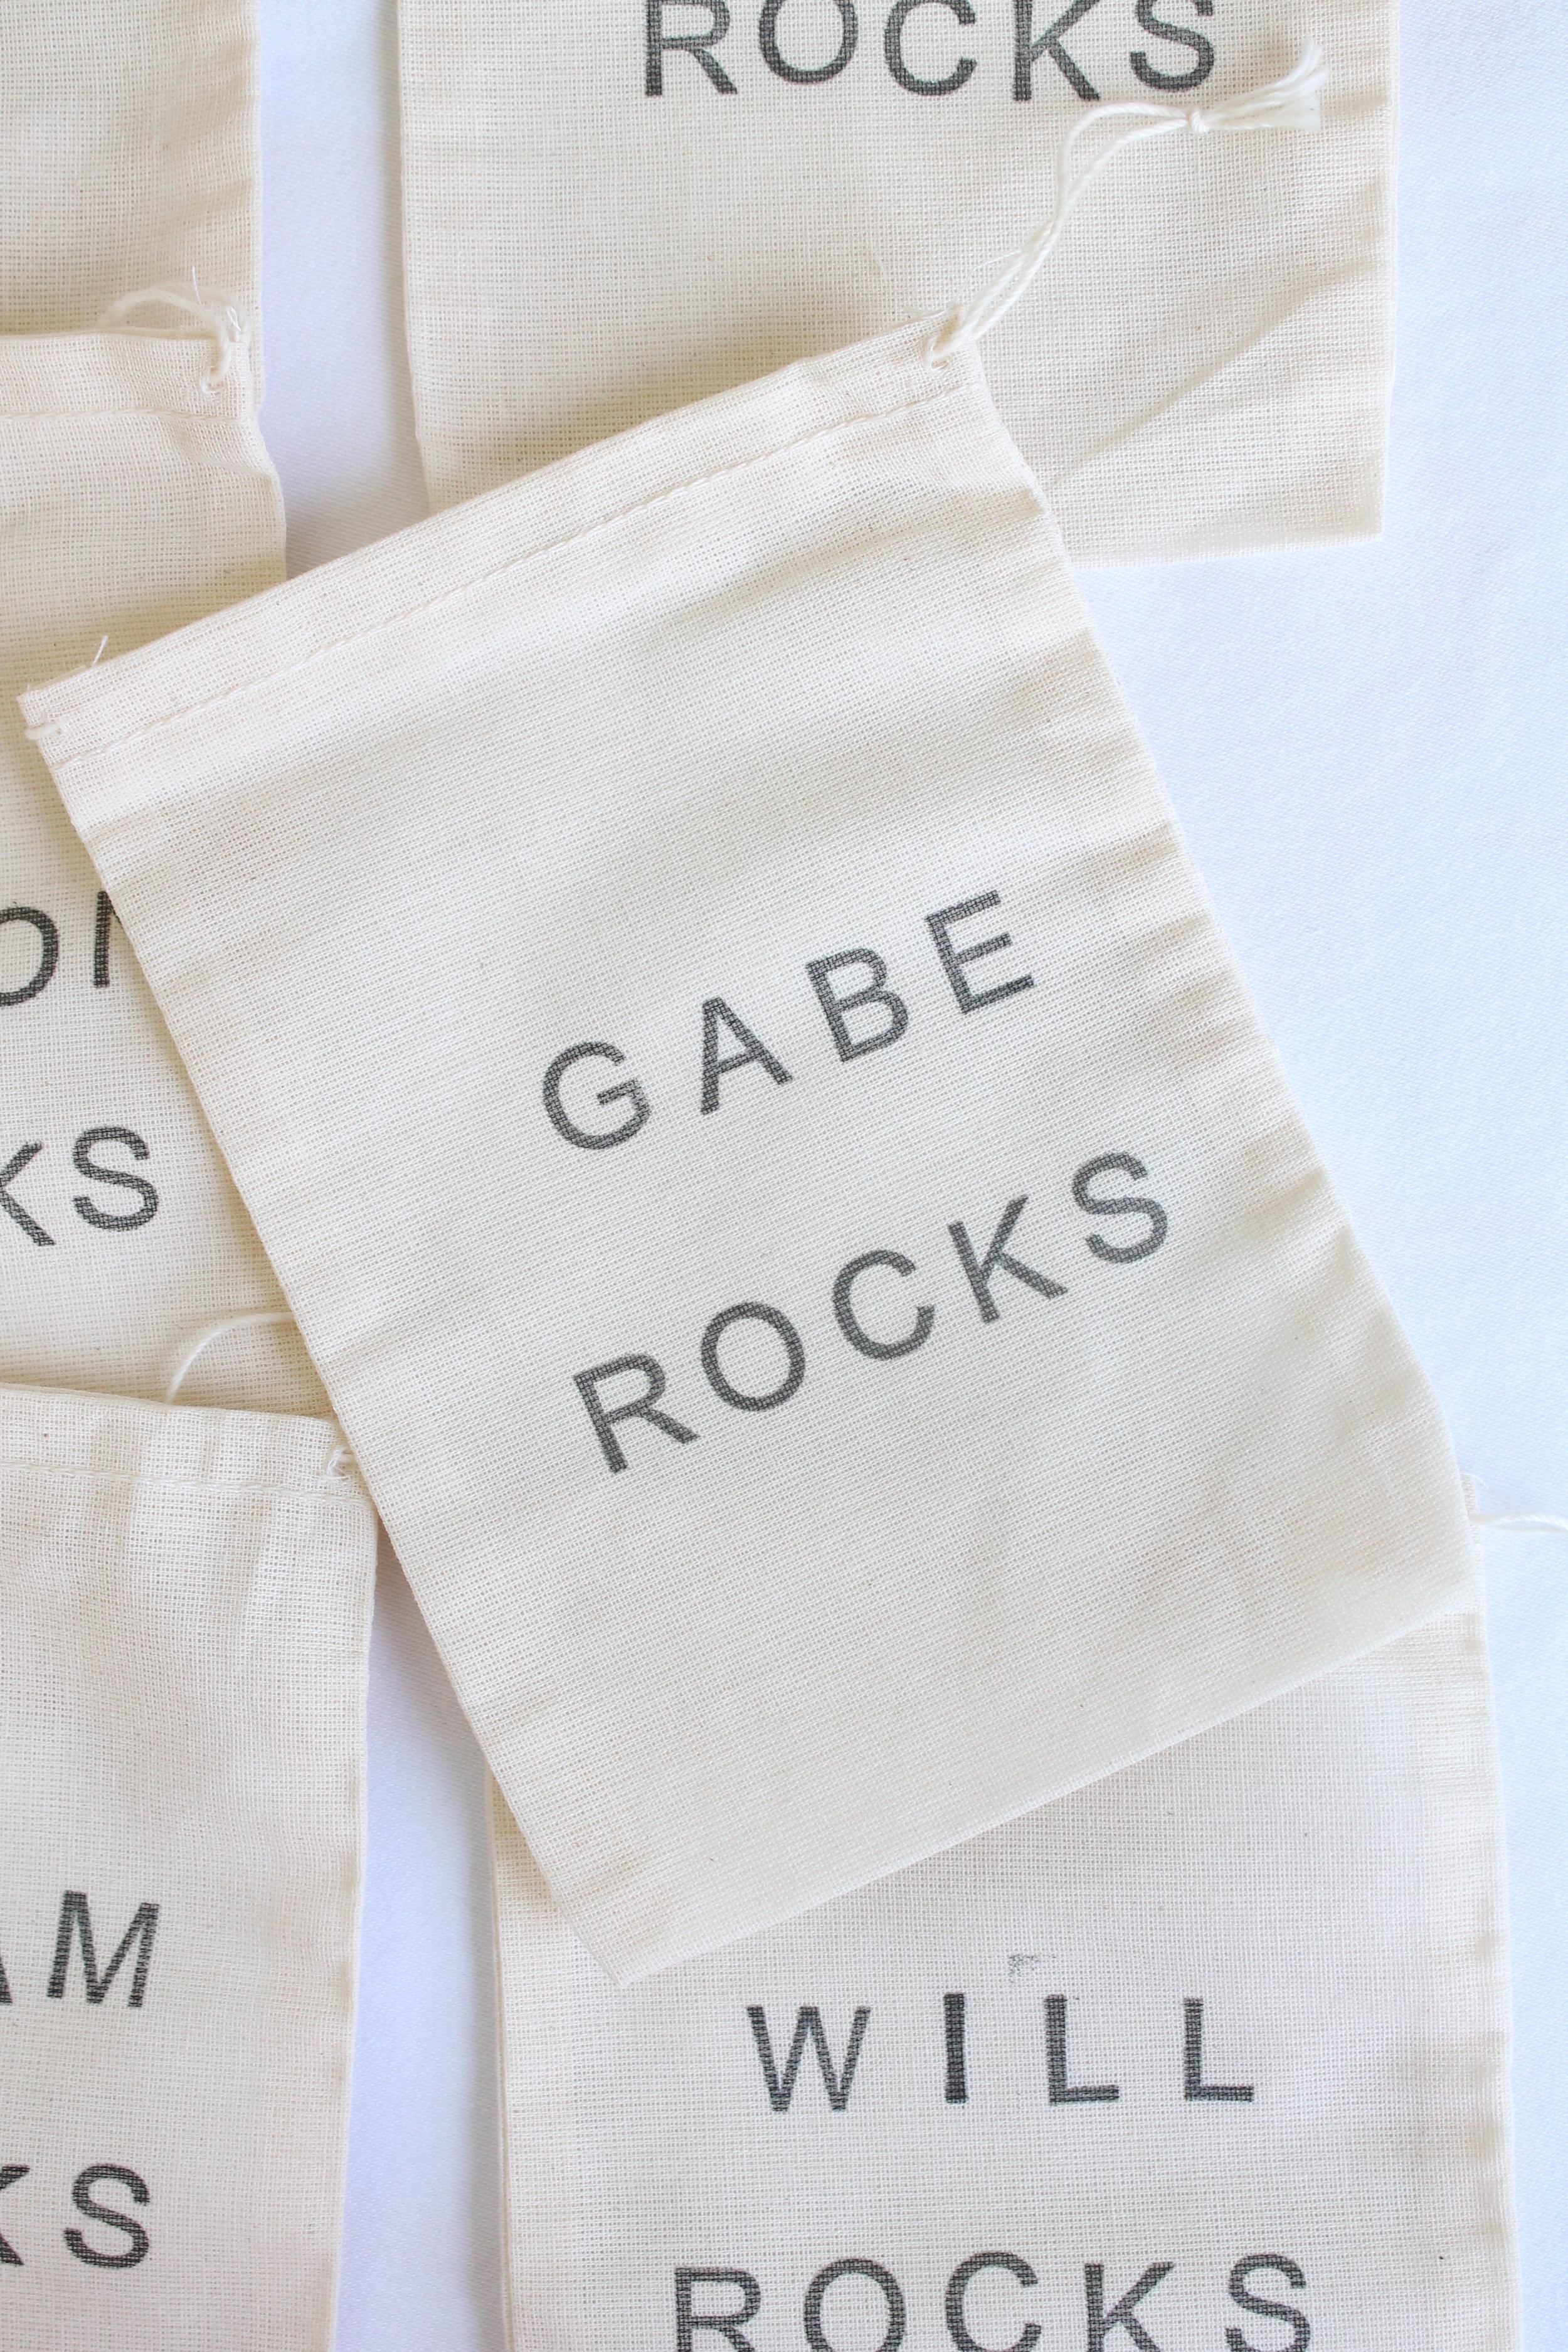 Little cloth bags for a birthday party. Can be stamped with whatever you like.